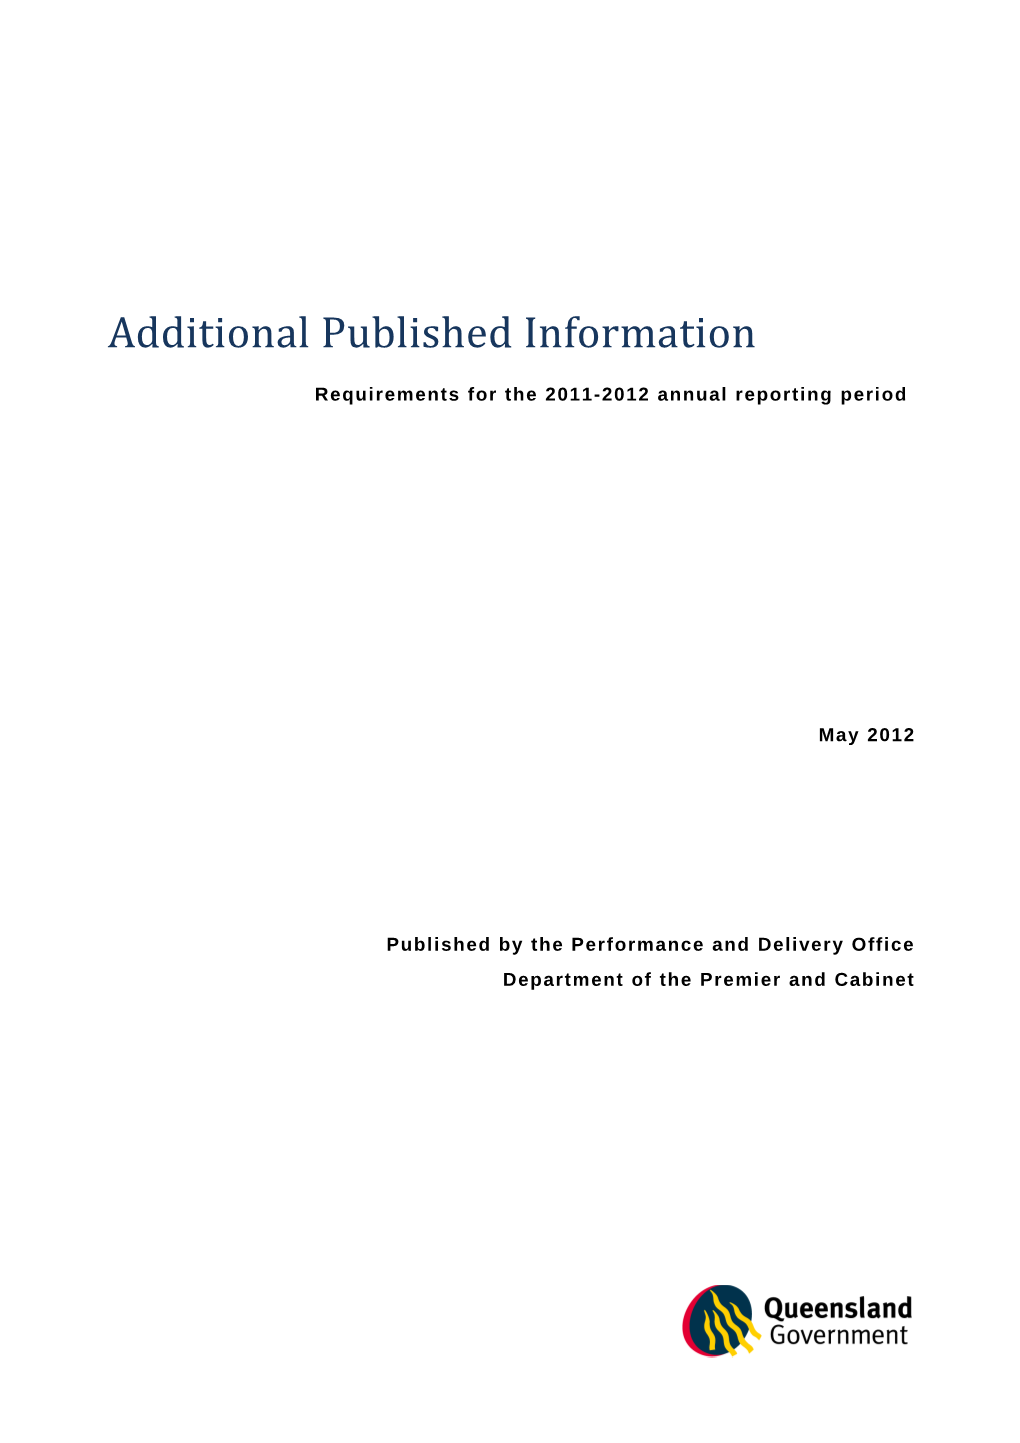 Additional Published Information Requirements for the 2011-2012 Annual Reporting Period